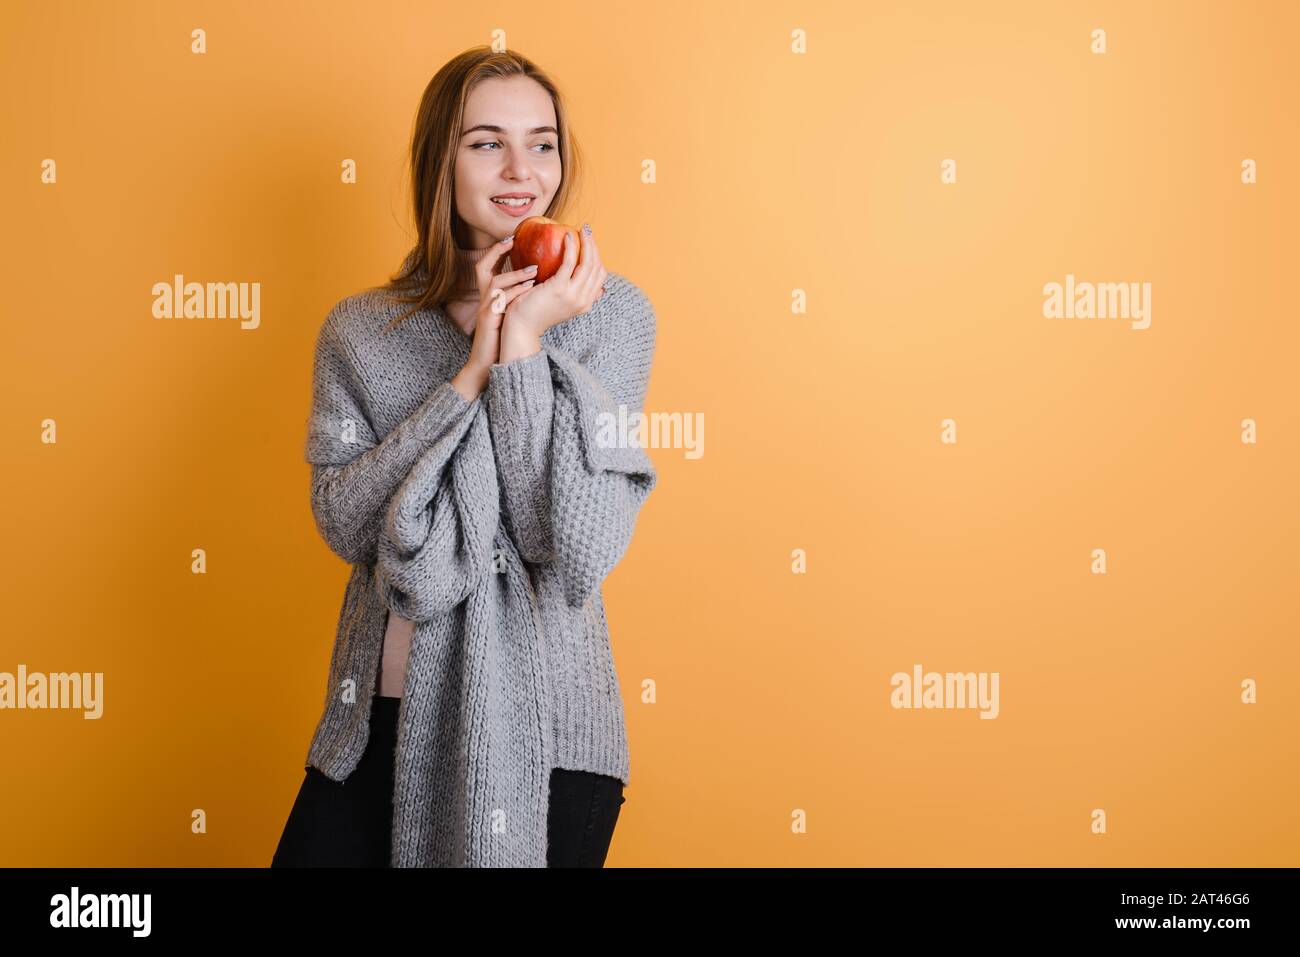 Girl in a warm sweater holds an apple and looks away. On a yellow background. Stock Photo